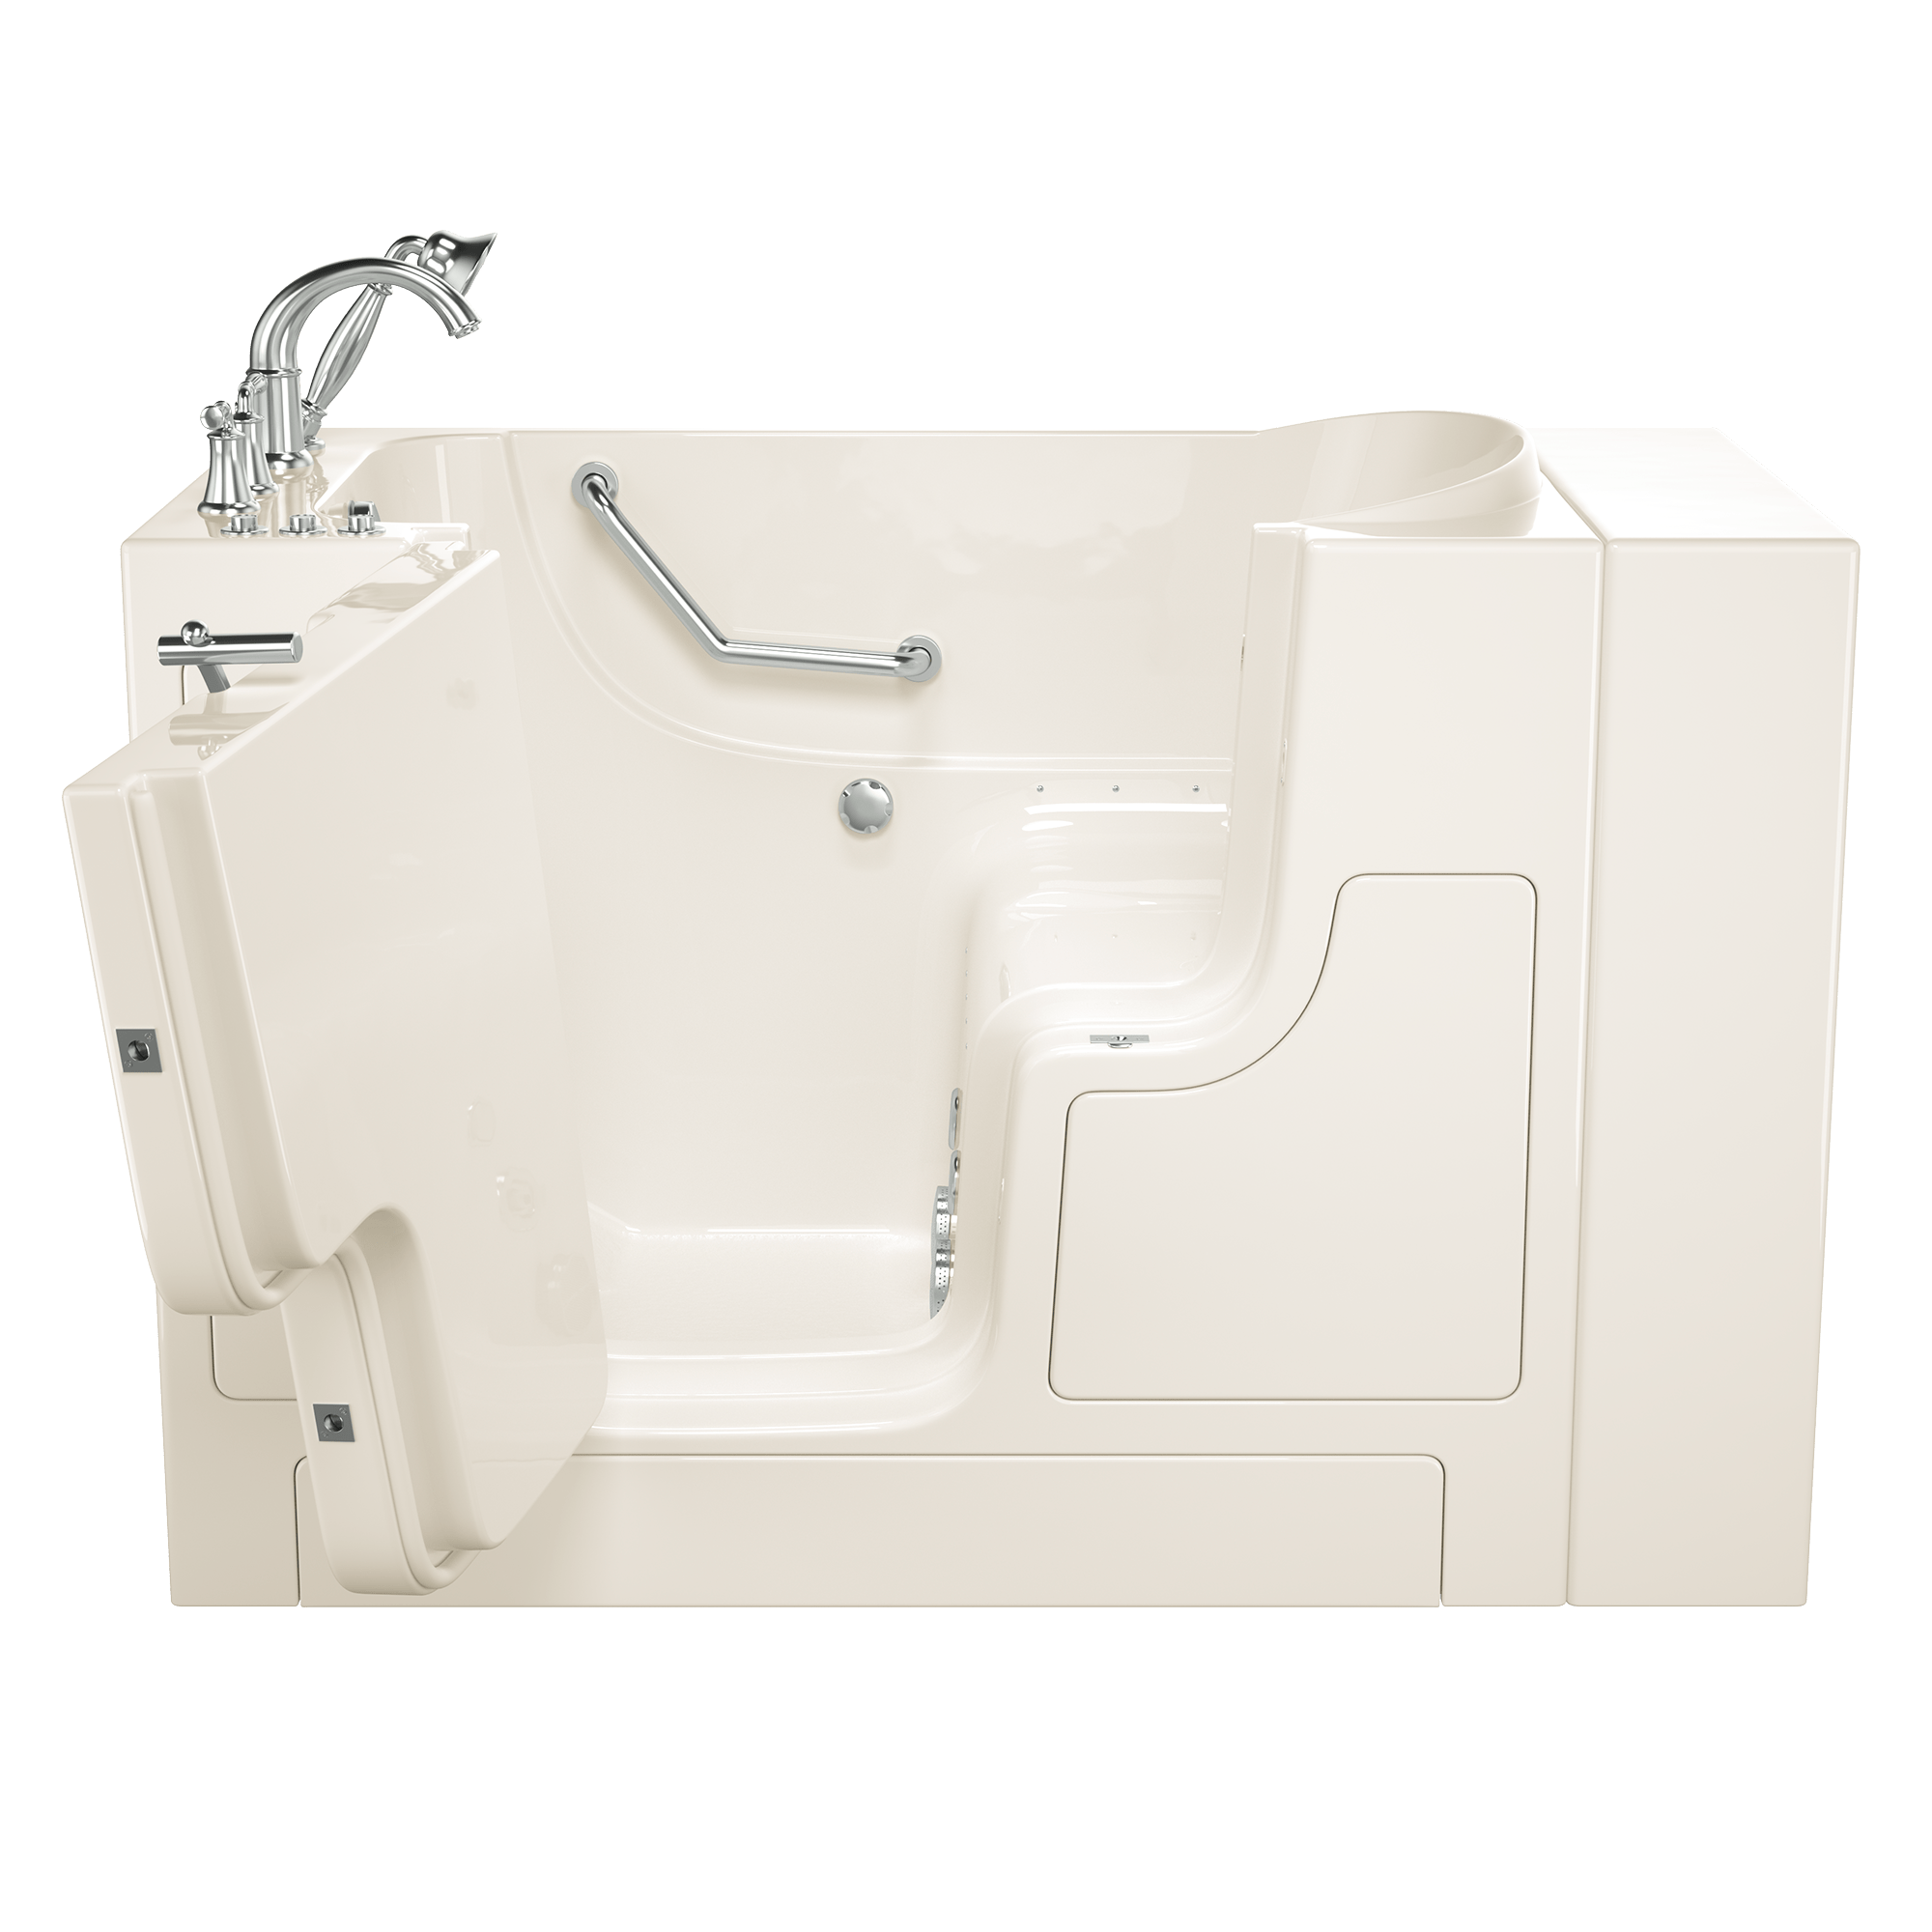 Gelcoat Value Series 30 x 52  Inch Walk in Tub With Combination Air Spa and Whirlpool Systems   Left Hand Drain With Faucet WIB LINEN